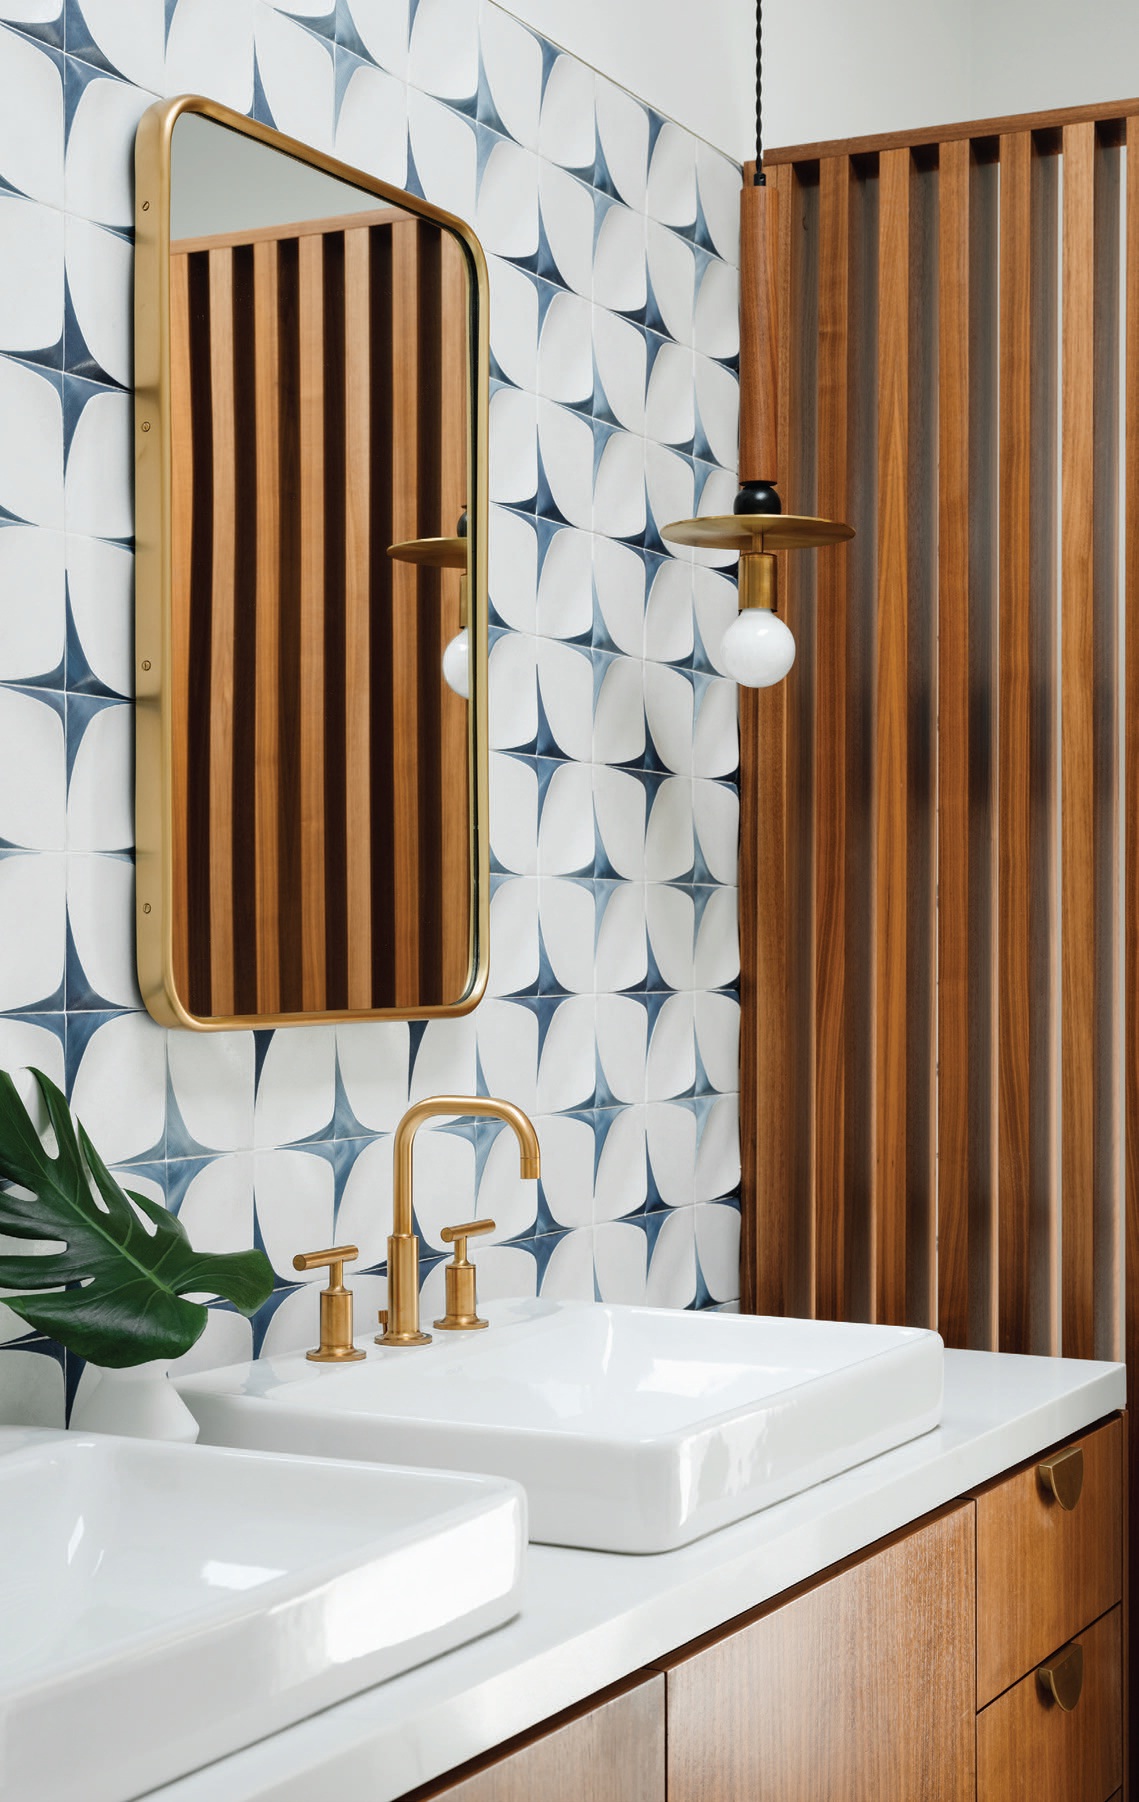 The primary bathroom boasts a bold backsplash by Trifecta Tile Concepts. PHOTOGRAPHED BY LANCE GERBER 